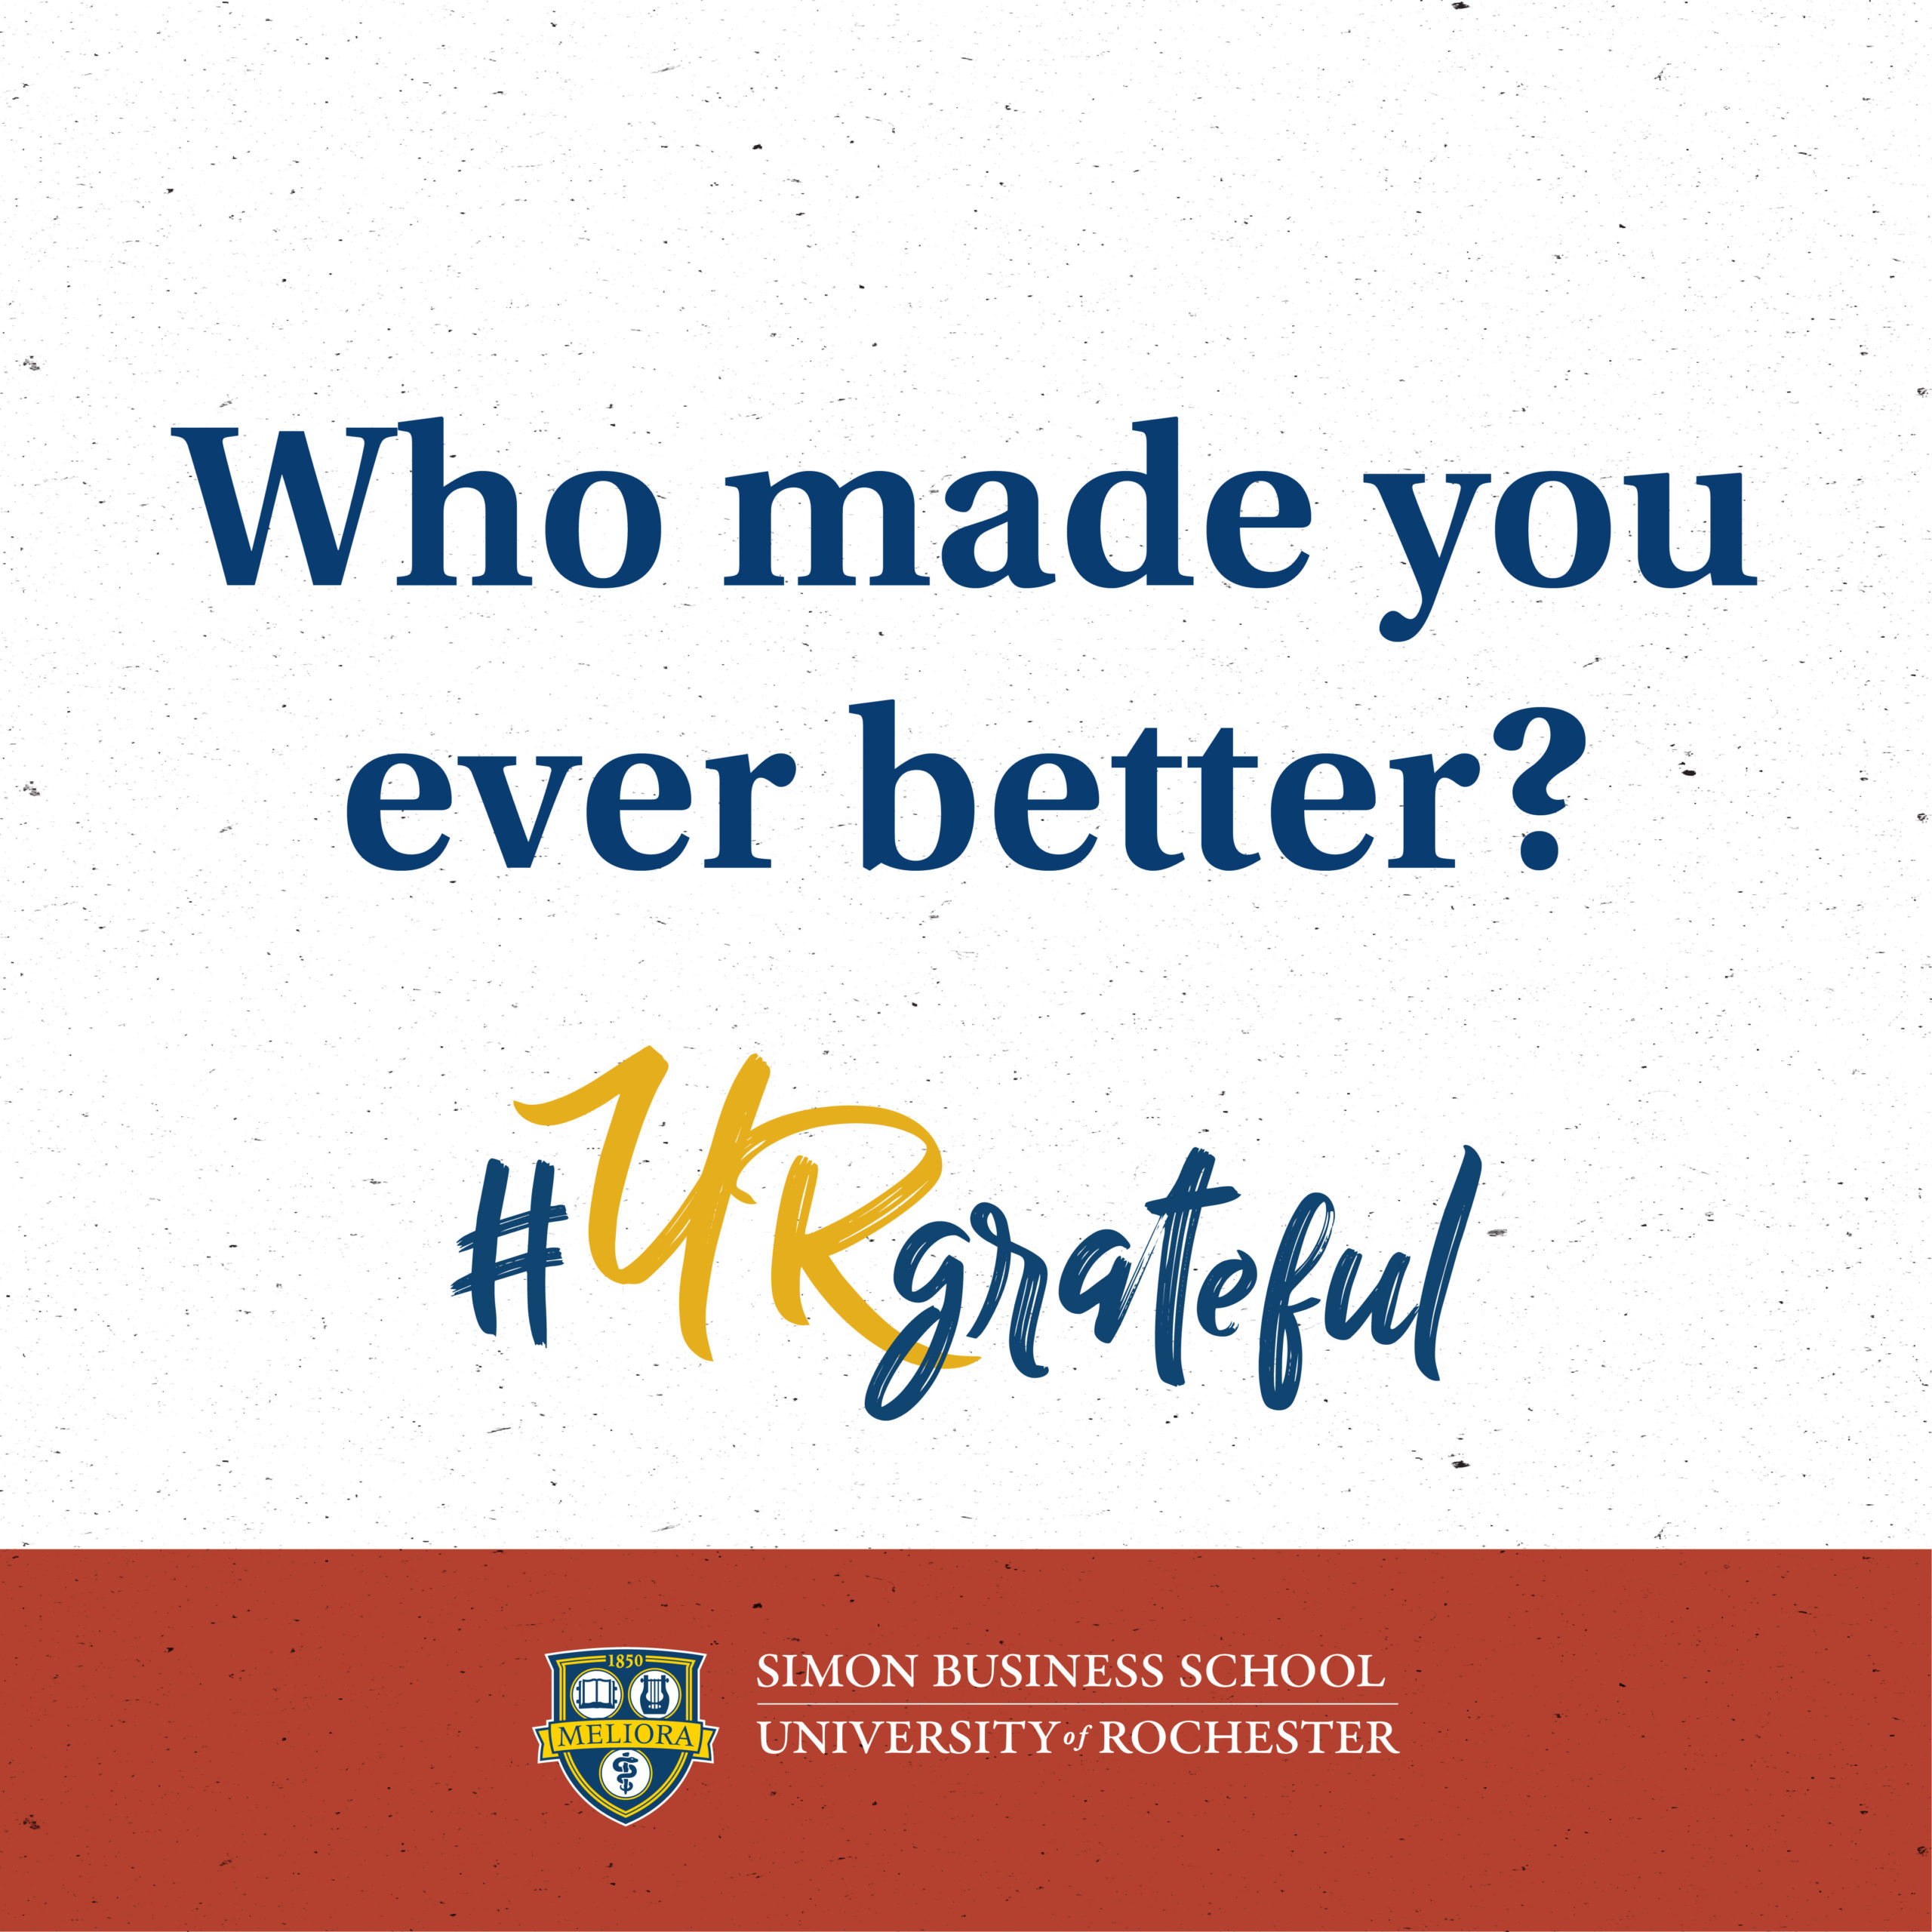 Who made you ever better? #URgrateful - Simon